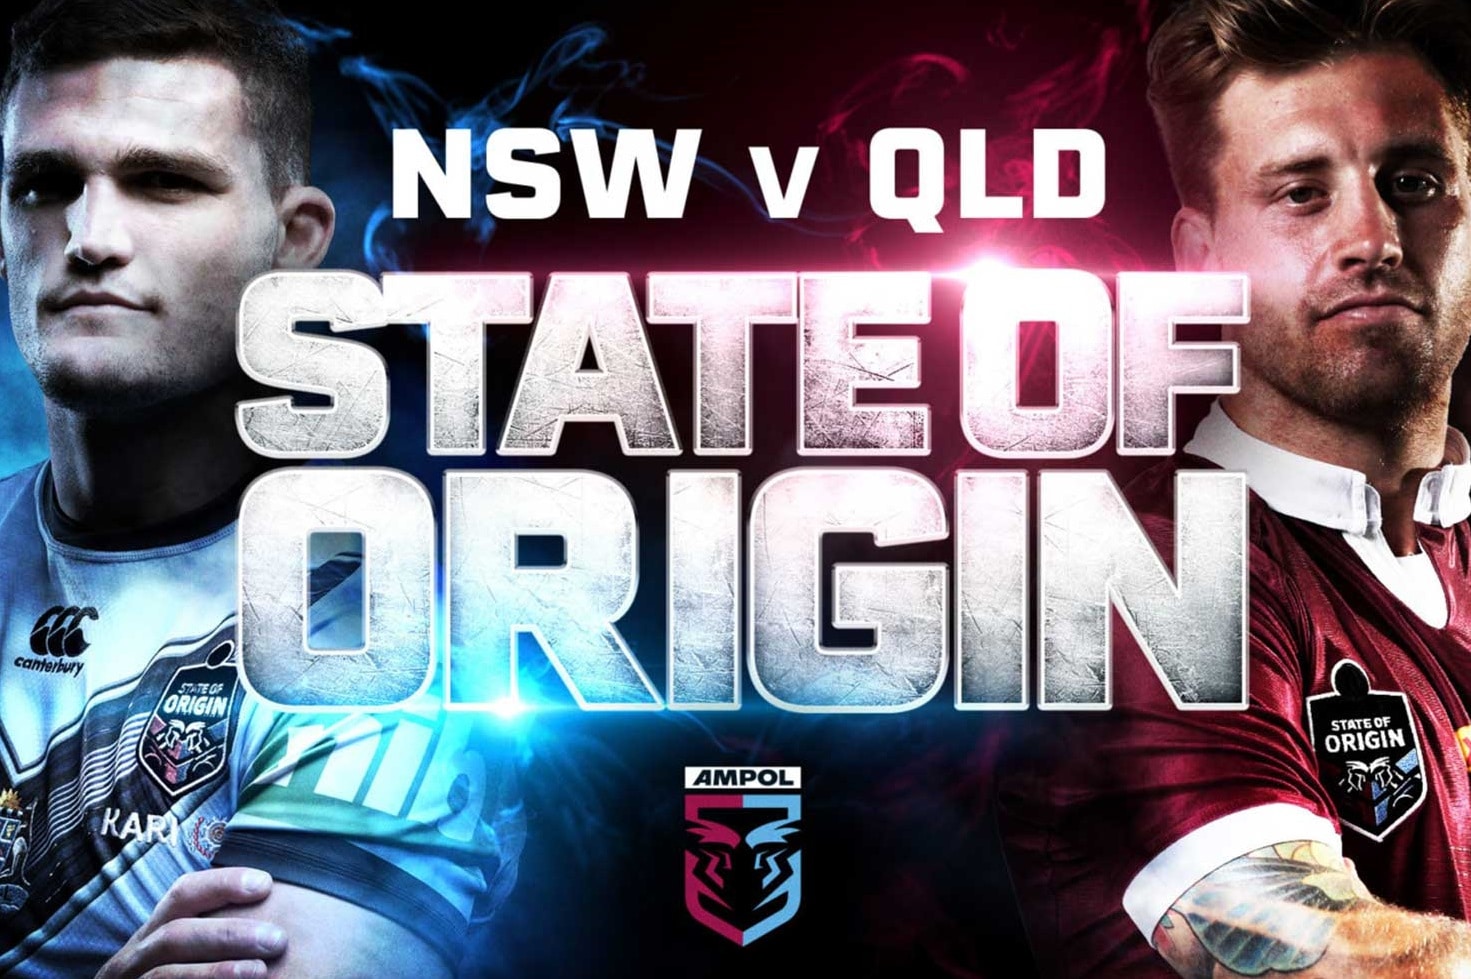 State Of Origin Game 3 Start Time Nsw Blues Vs Qld Maroons Live Scores Updates Start Time